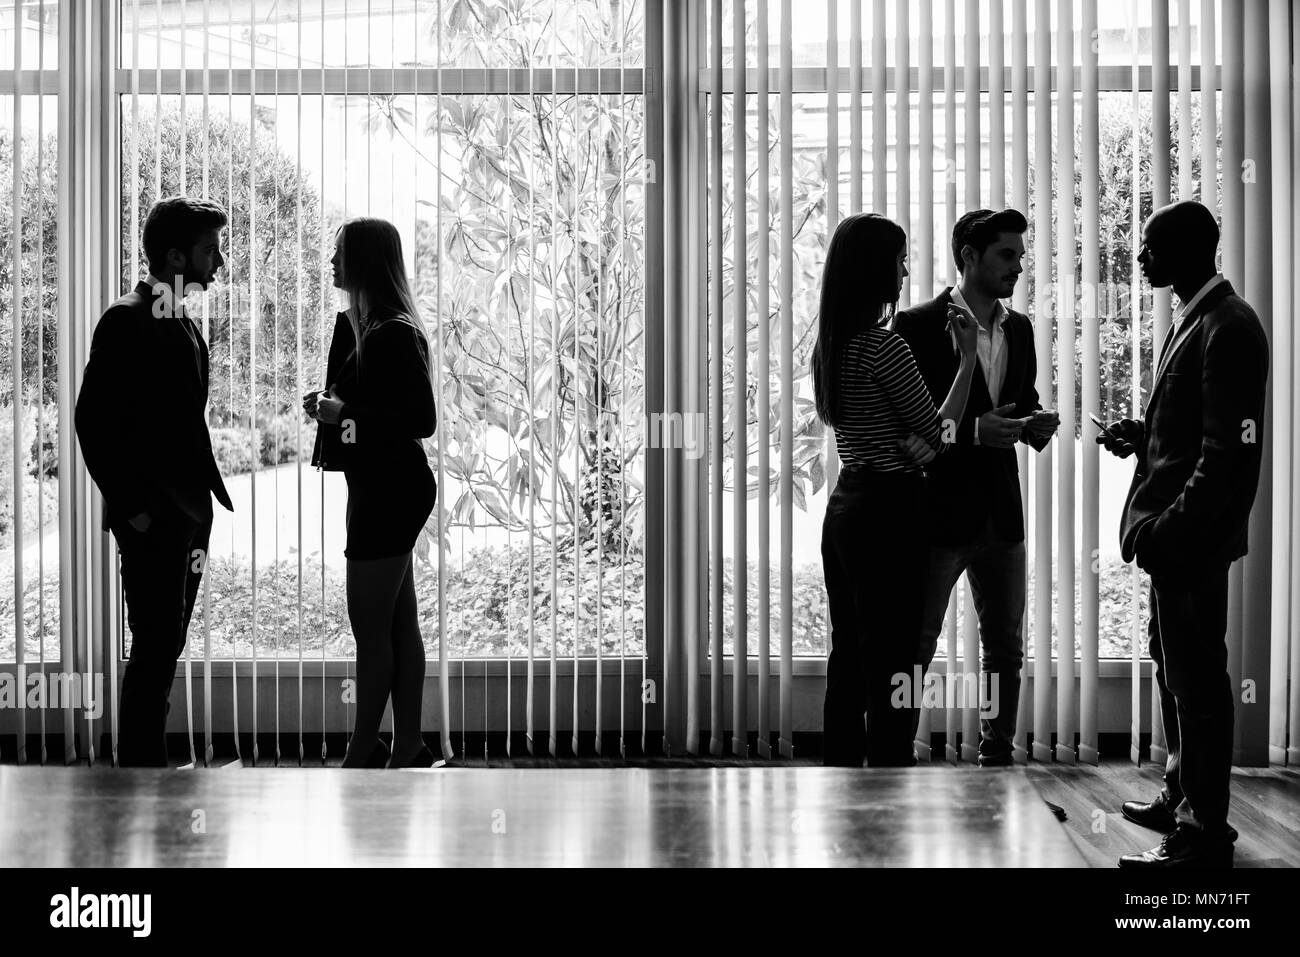 Several silhouettes of businesspeople interacting background business centrer Stock Photo